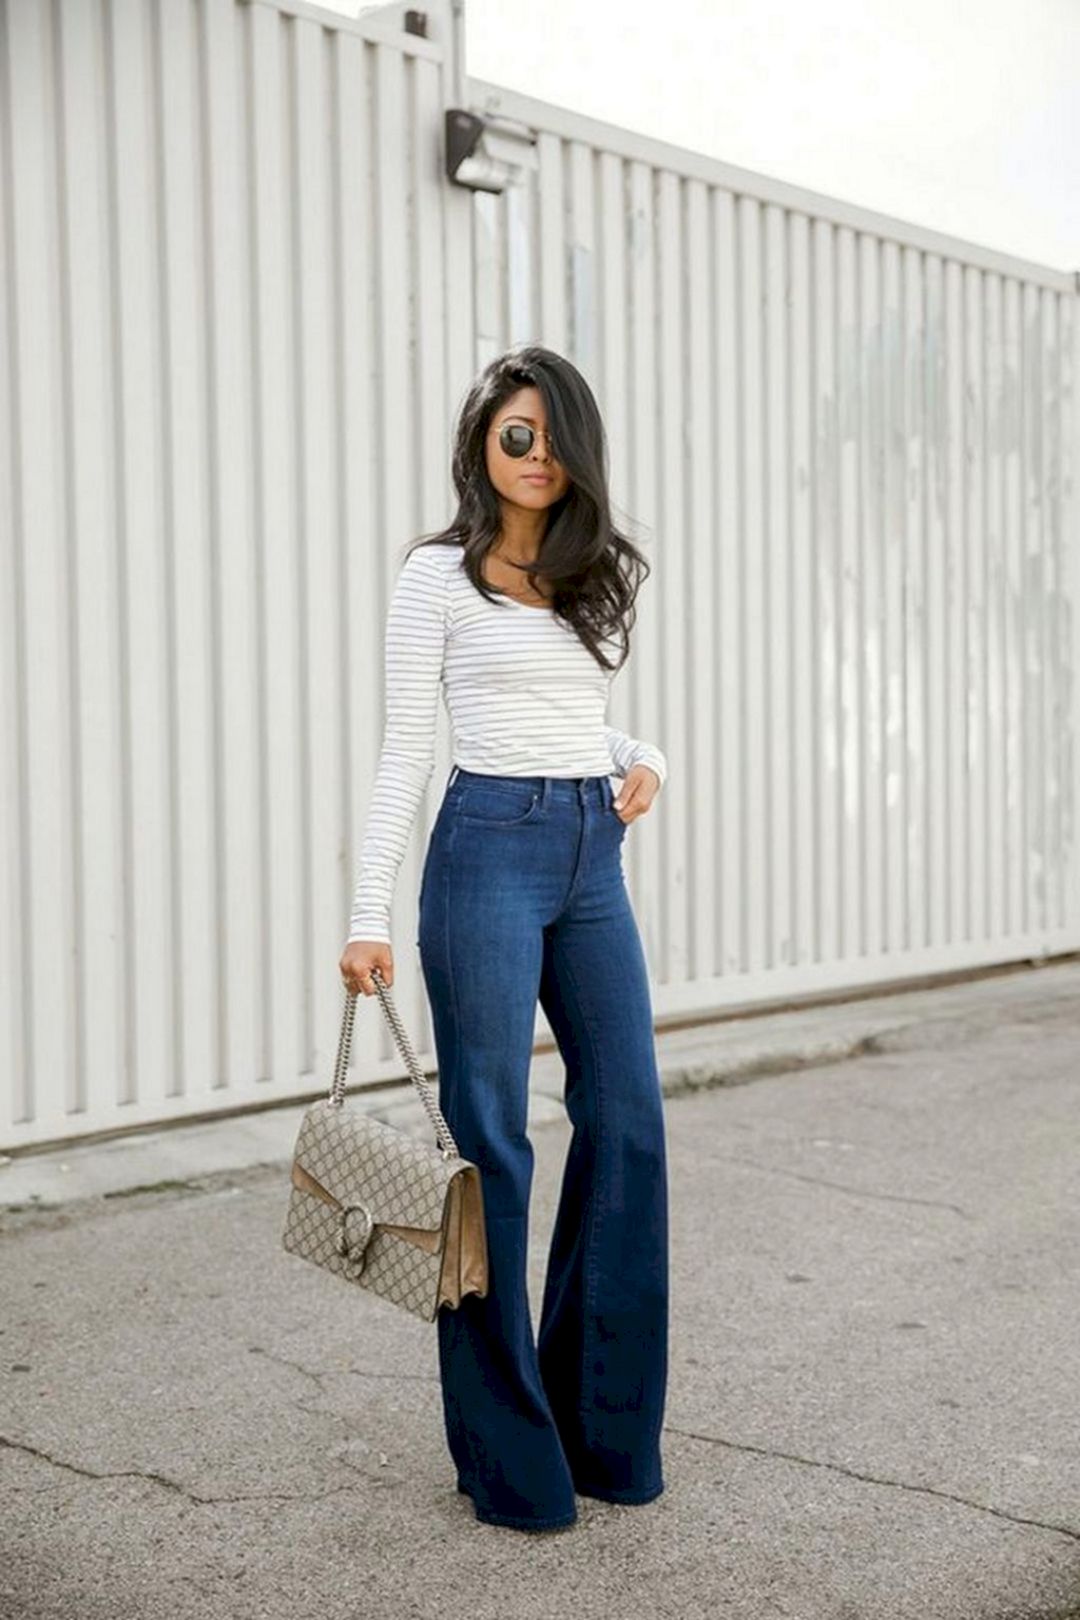 Striped long t-shirt with your high-waisted jeans from fasbest